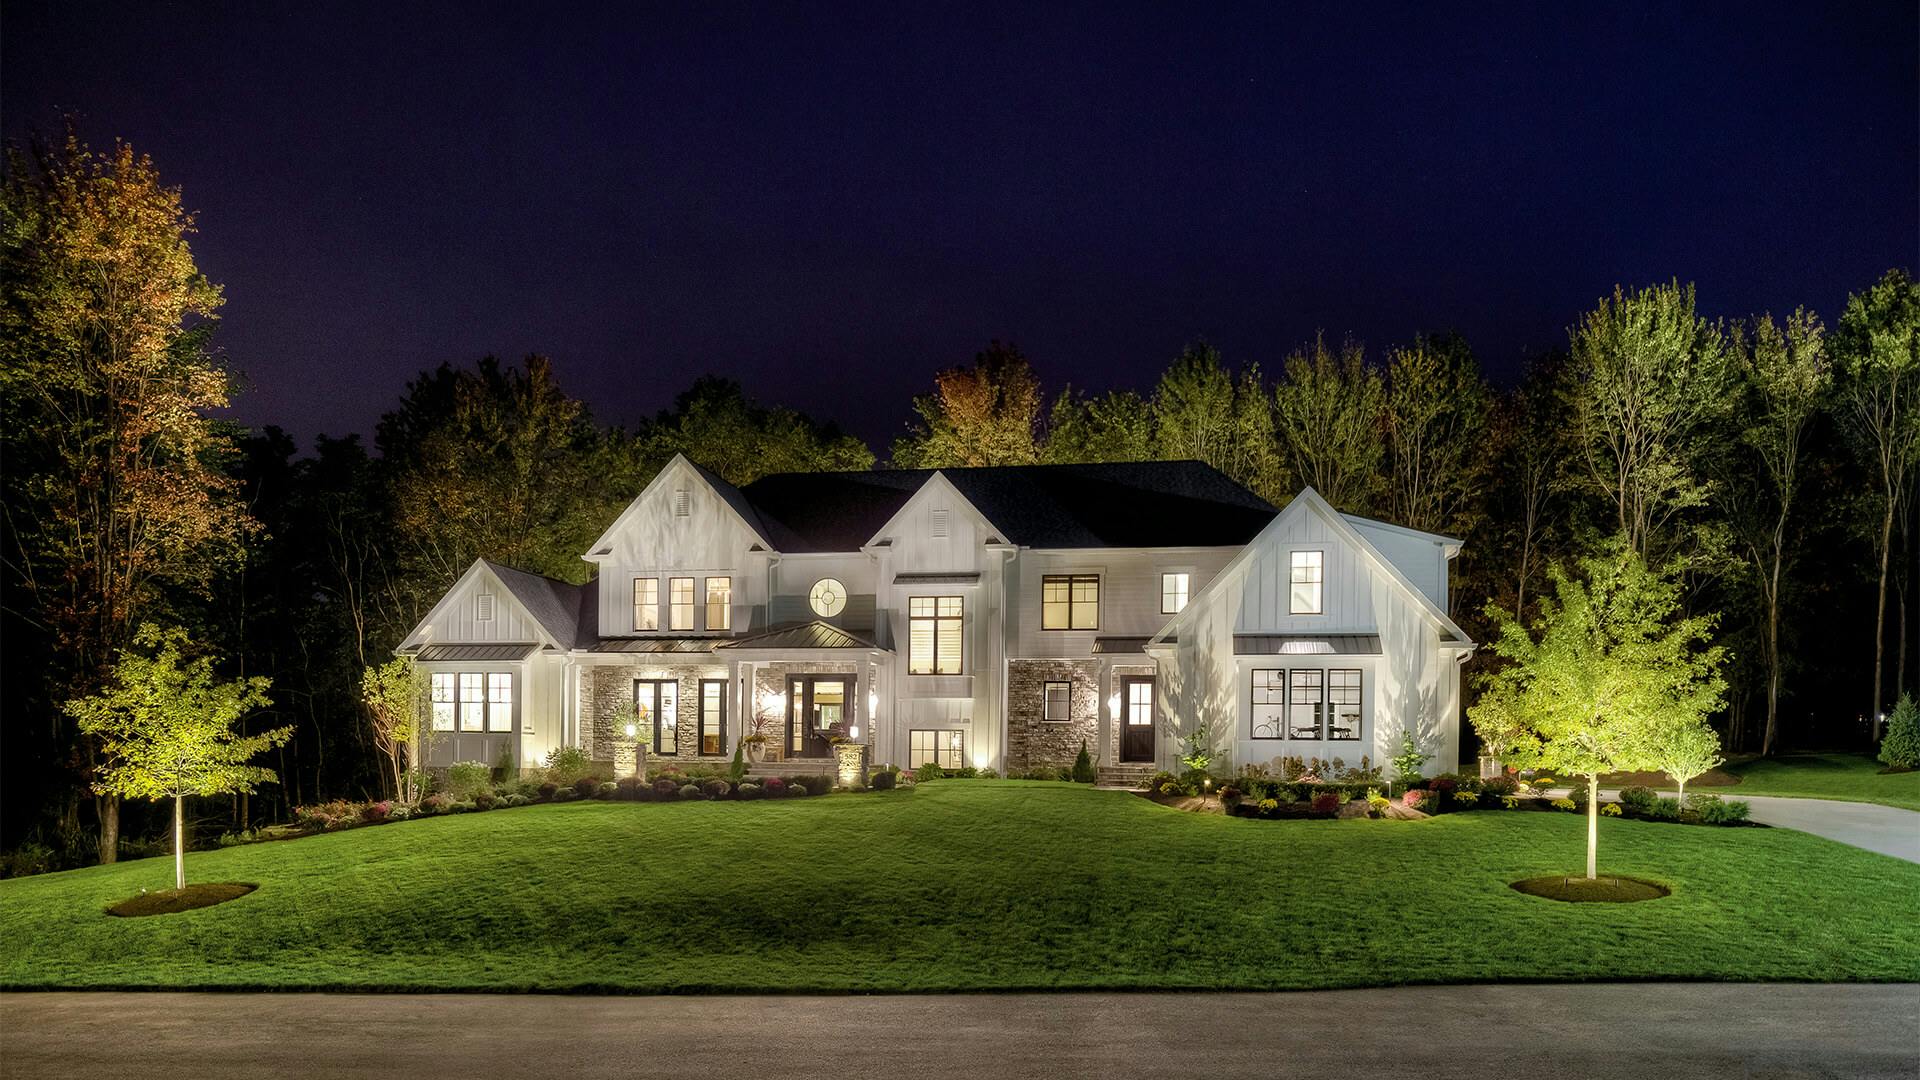 Modern farmhouse at night with landscape lighting